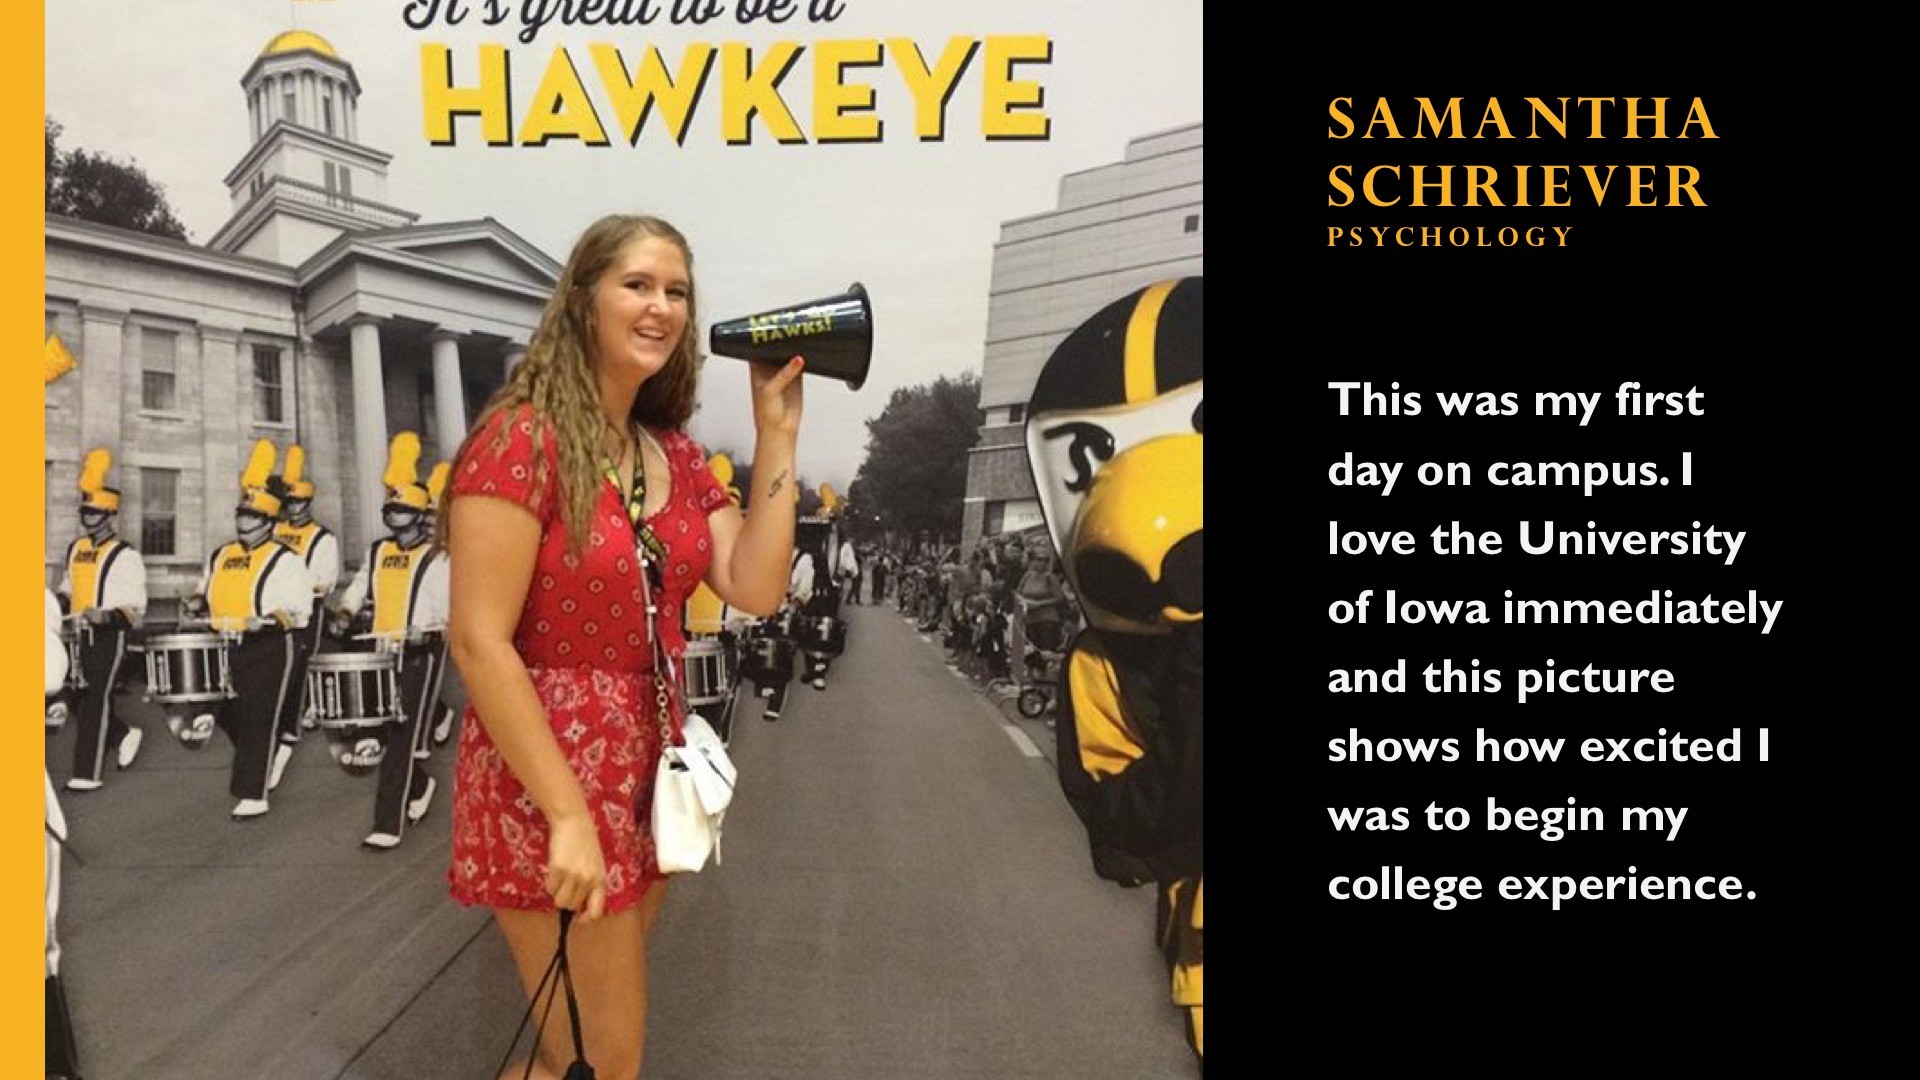 Samantha Schriever. Psychology. This was my first day on campus. I loved the University of iowa immediately and this picture shows how excited I was to begin my college experience. 